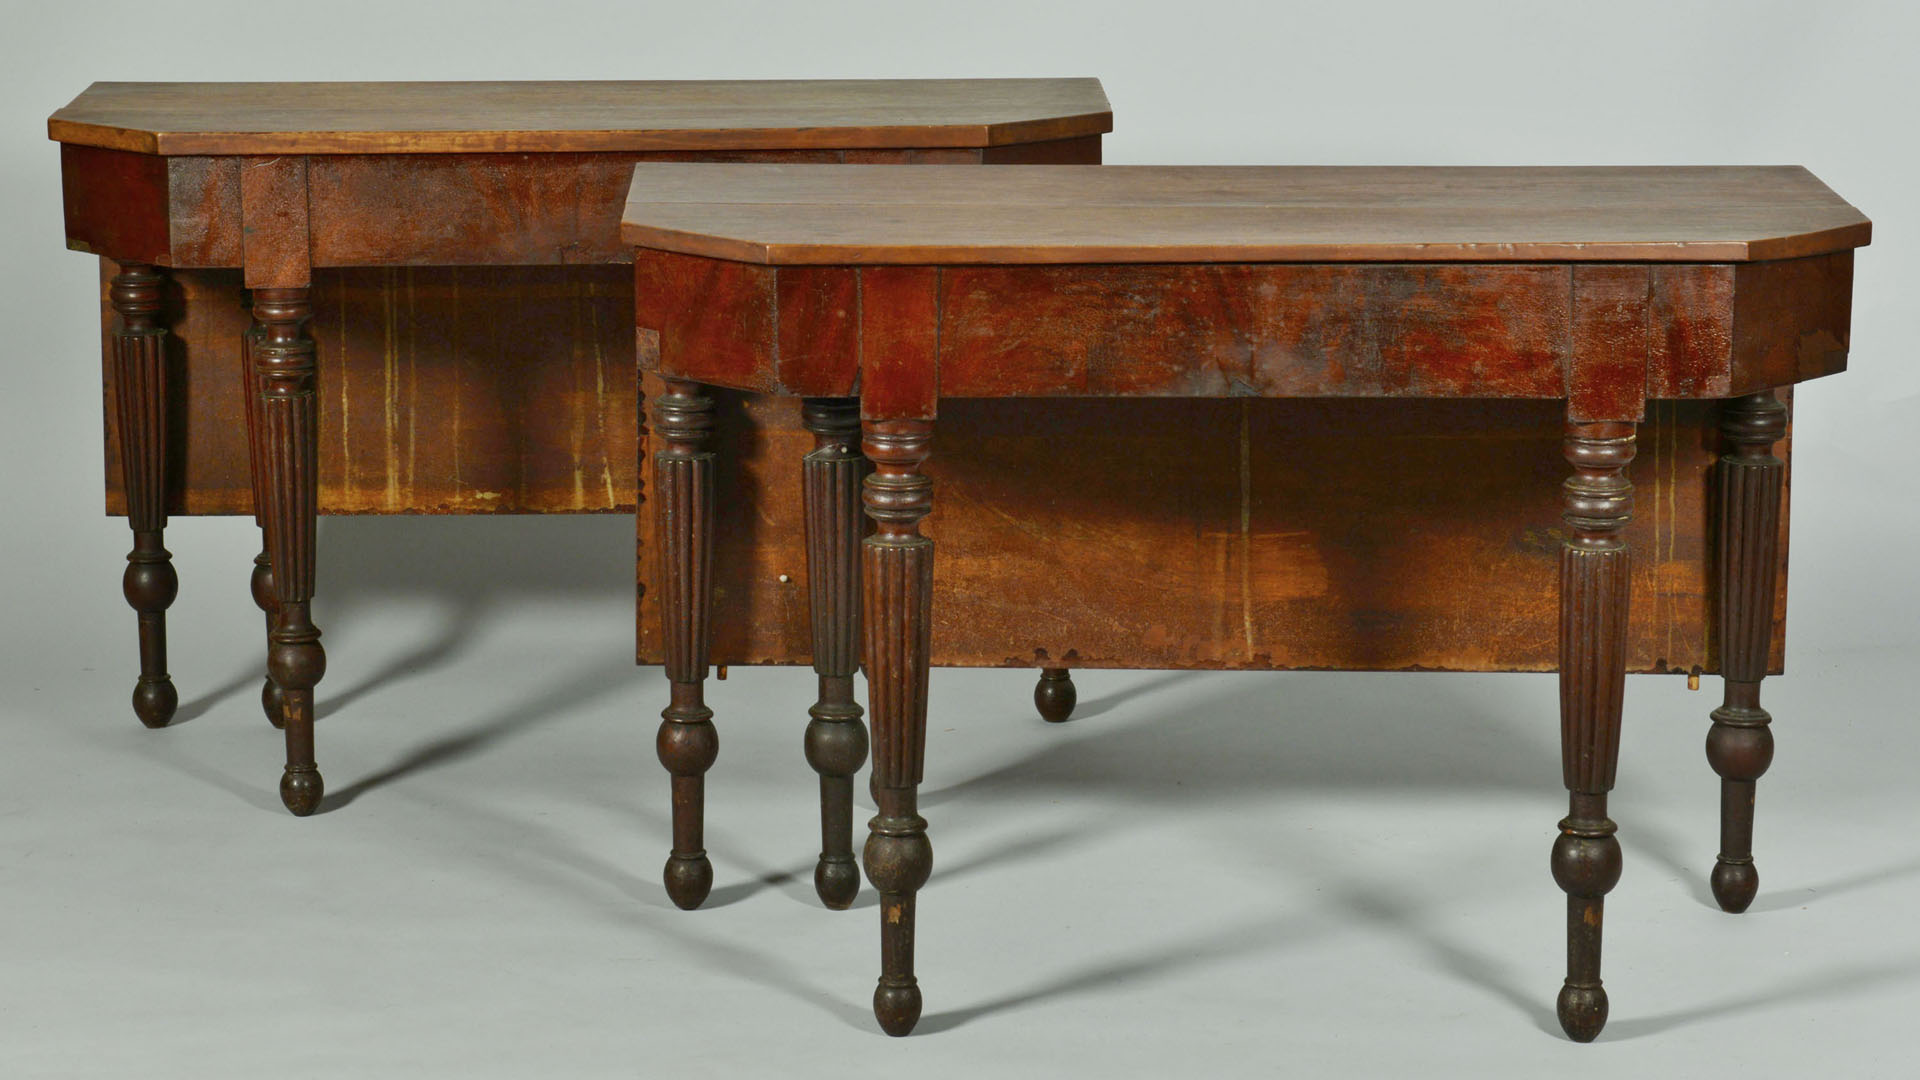 Lot 56: Kentucky Dining Table (2 banquet ends)